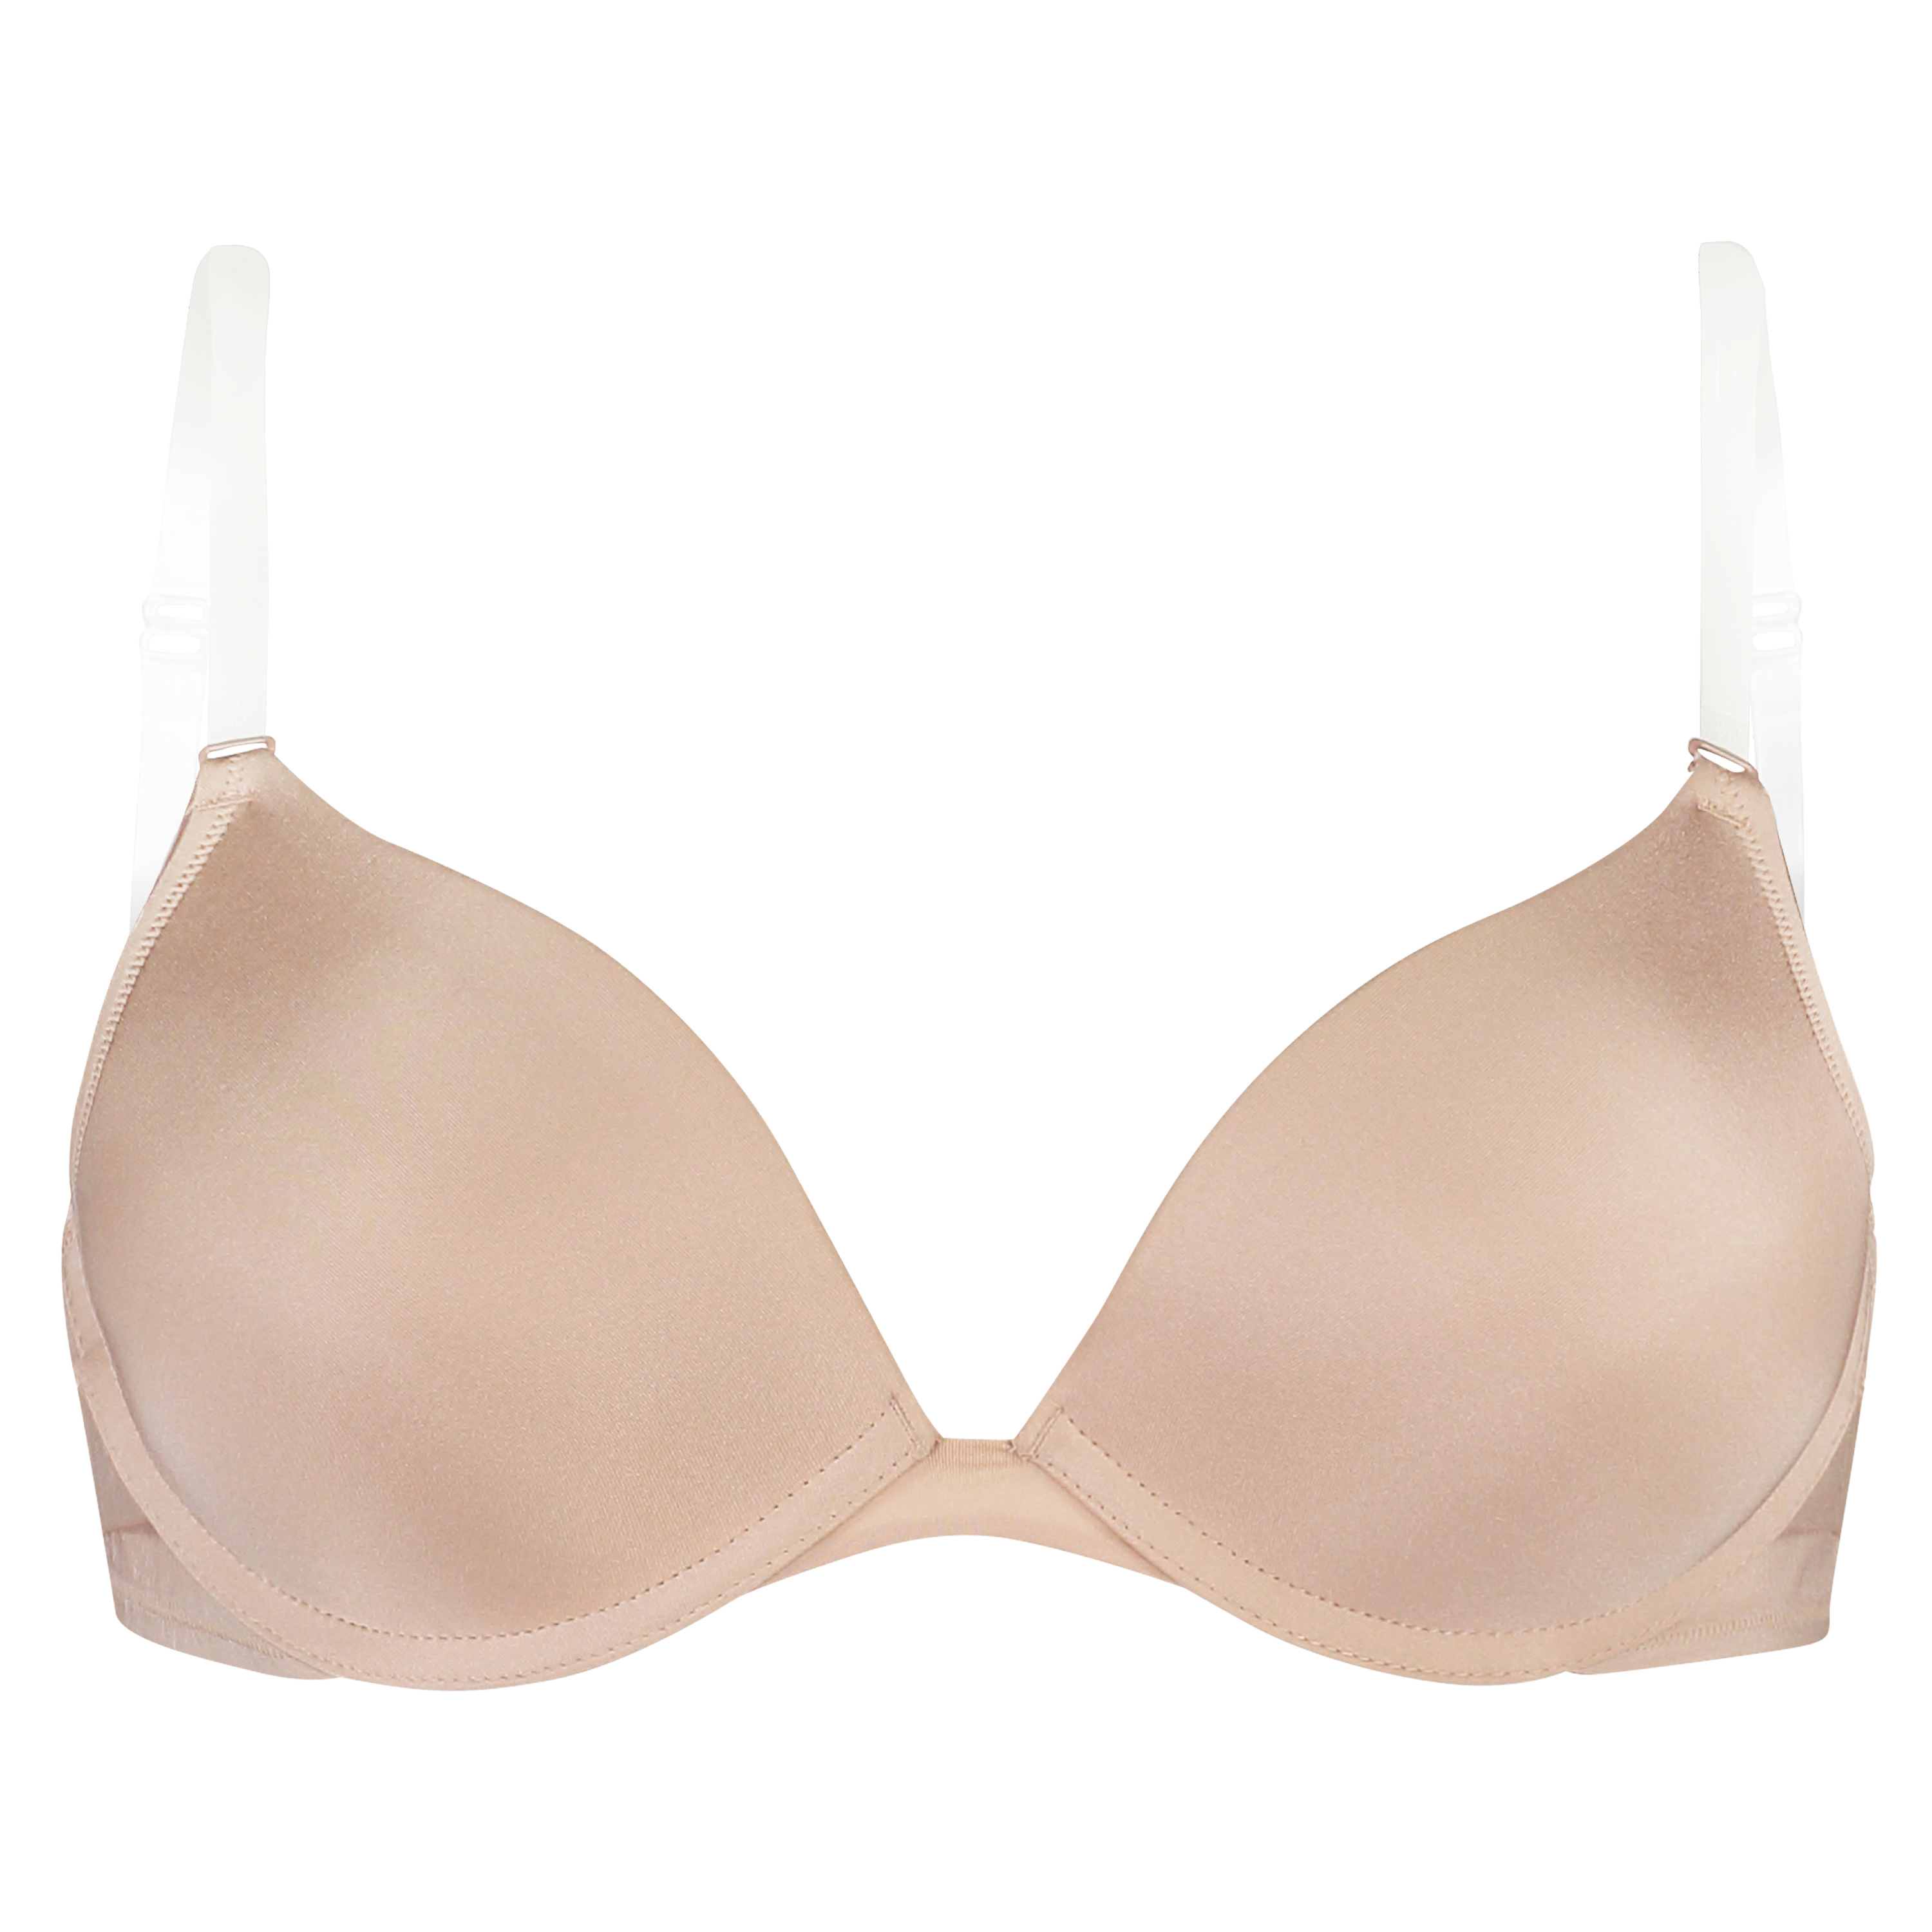 Transparent Back Padded Underwired Push-Up Bra for €34.99 - Push